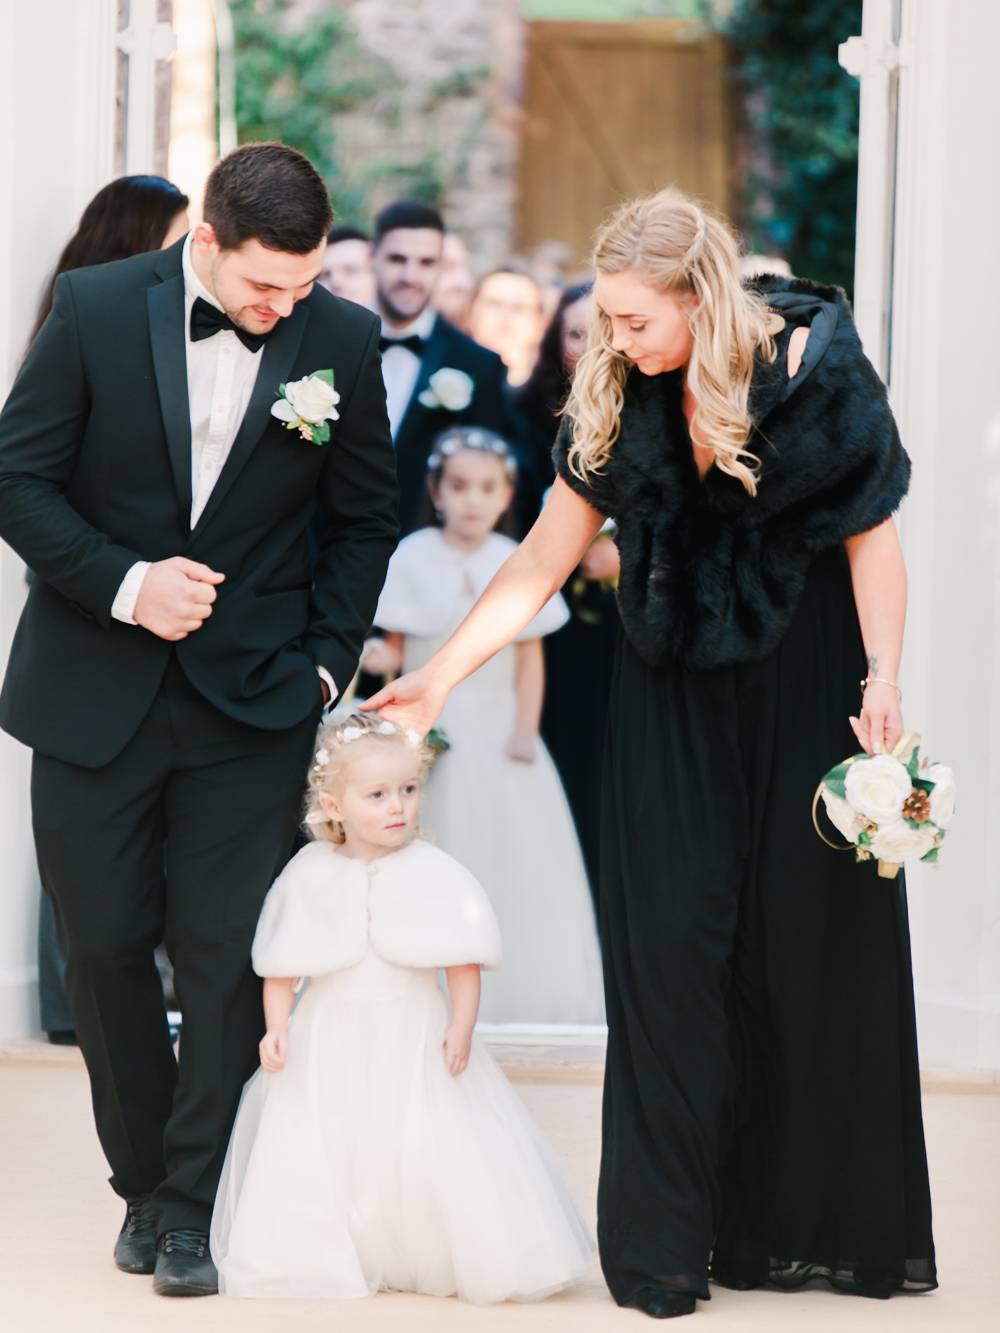 Bridesmaid and flower girl walk down the ceremony aisle